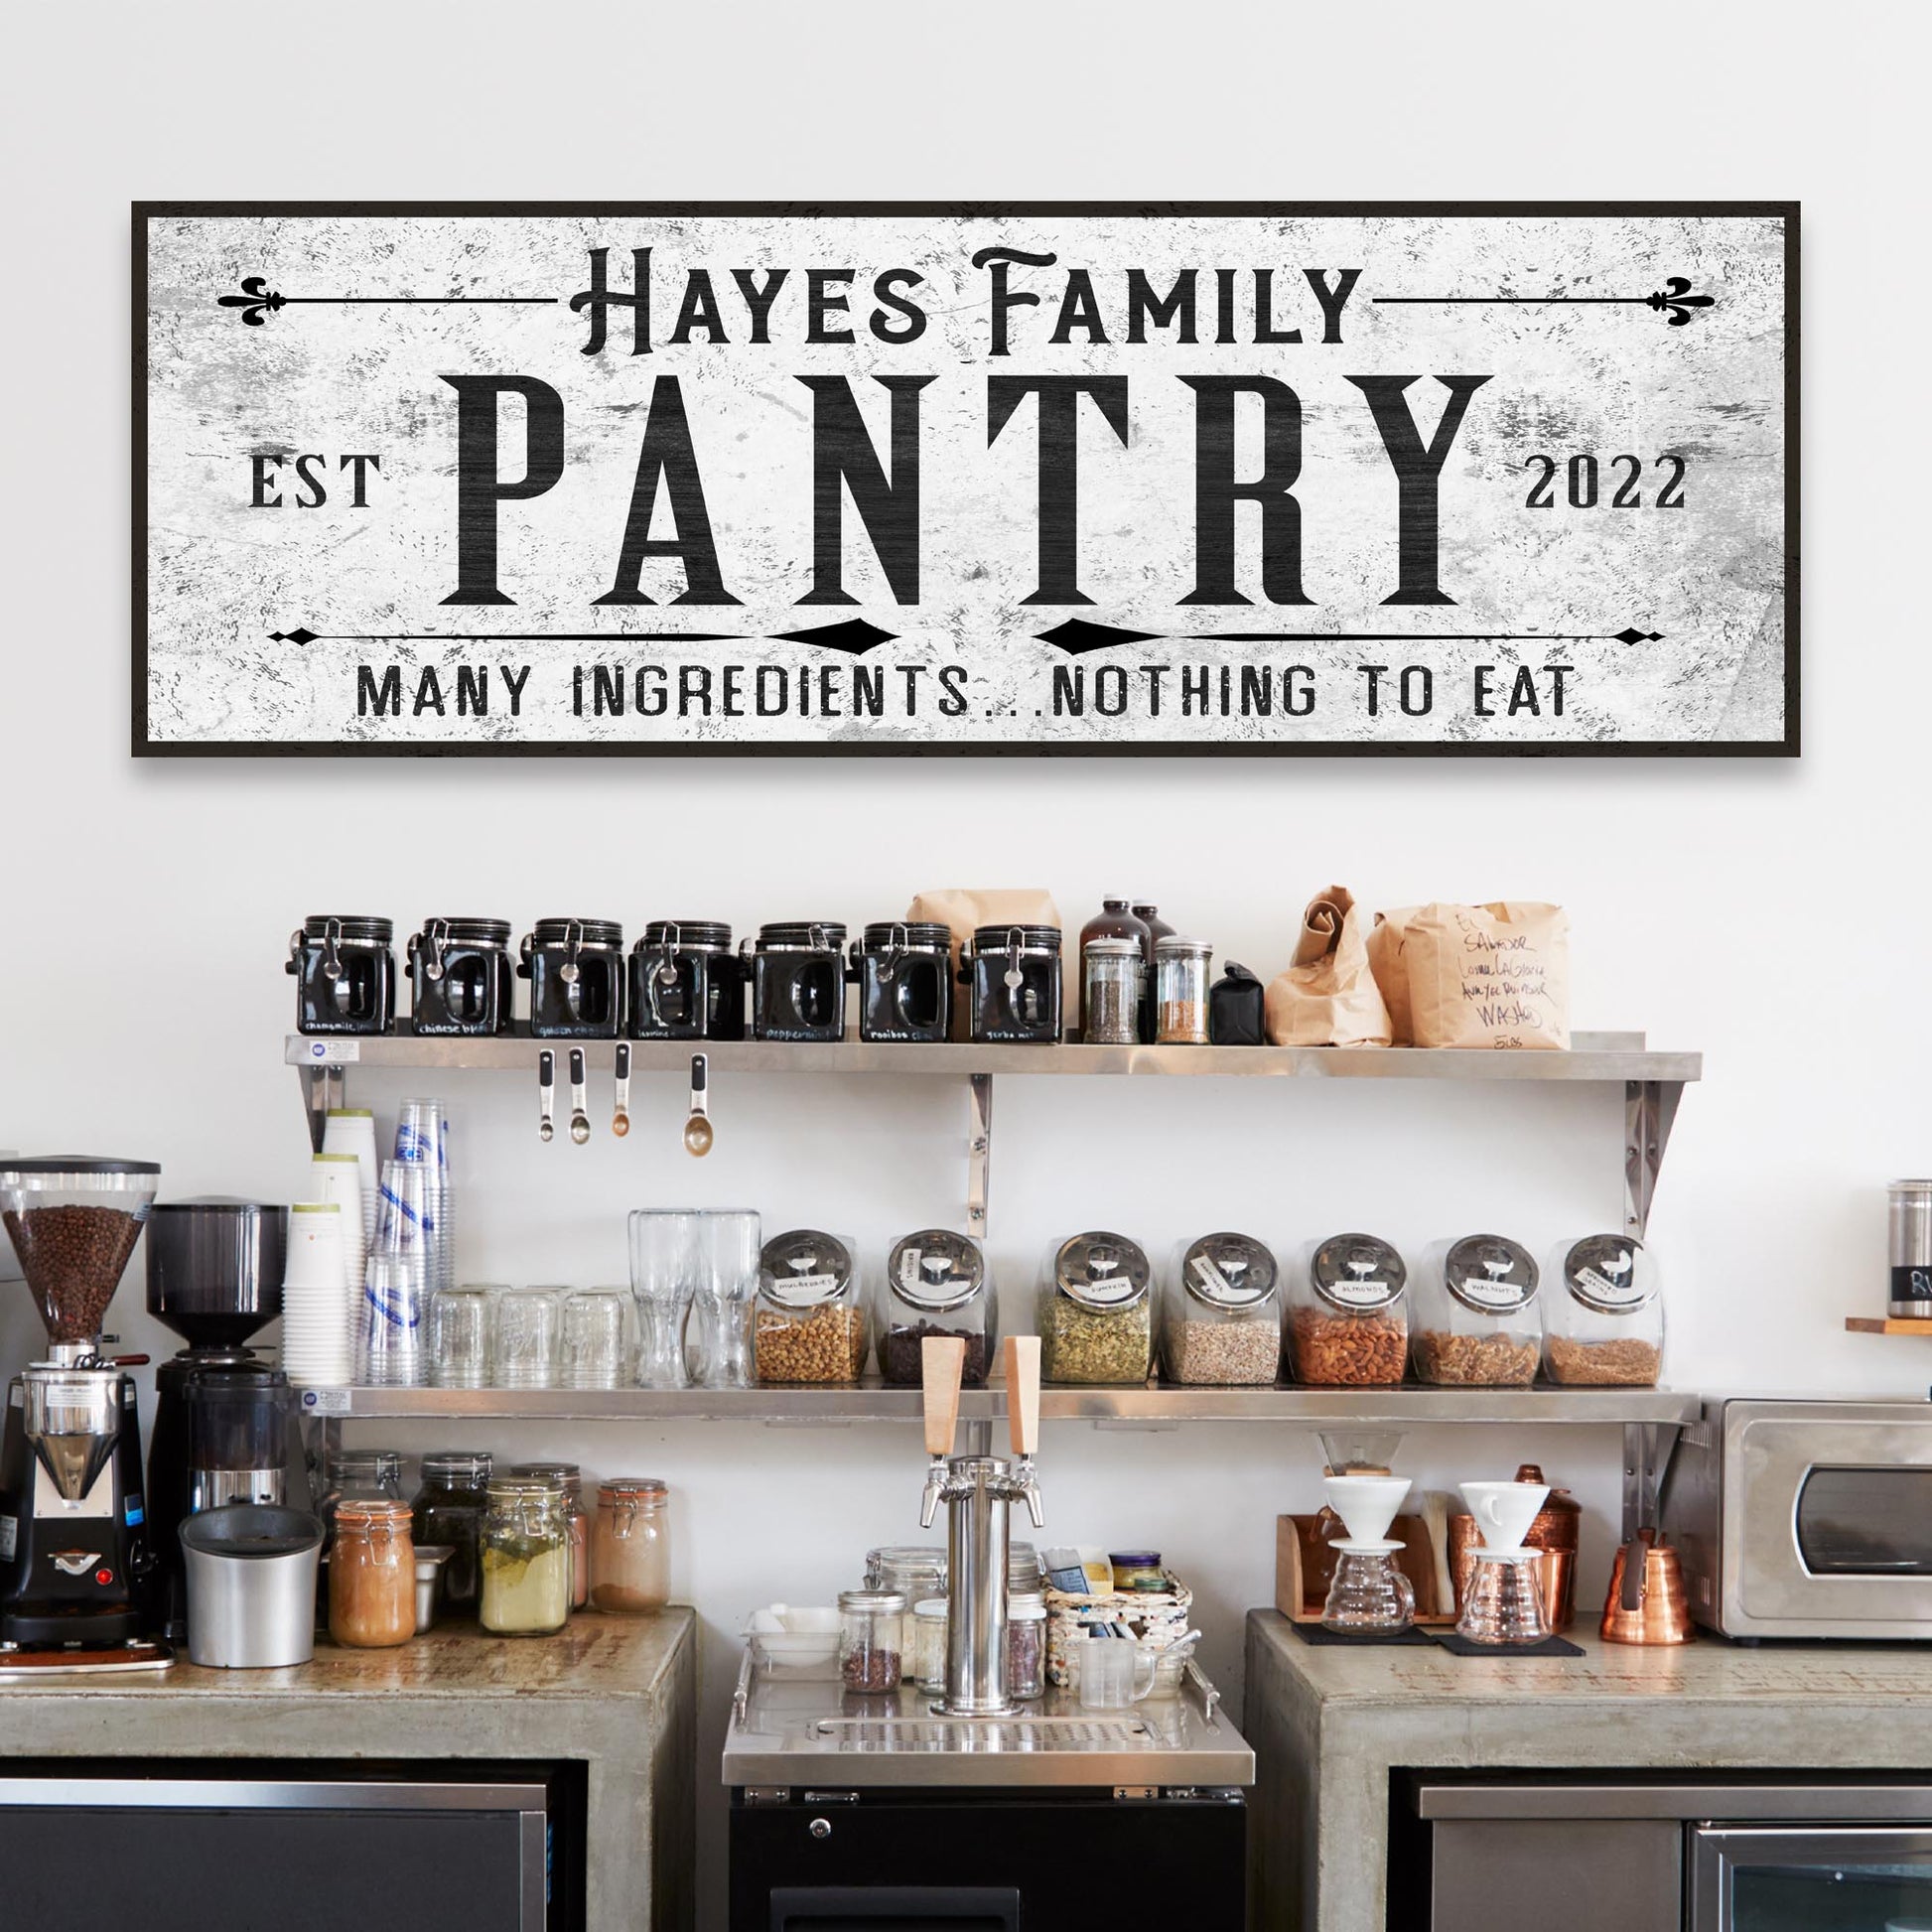 Many Ingredients, Nothing To Eat Pantry Sign - Image by Tailored Canvases